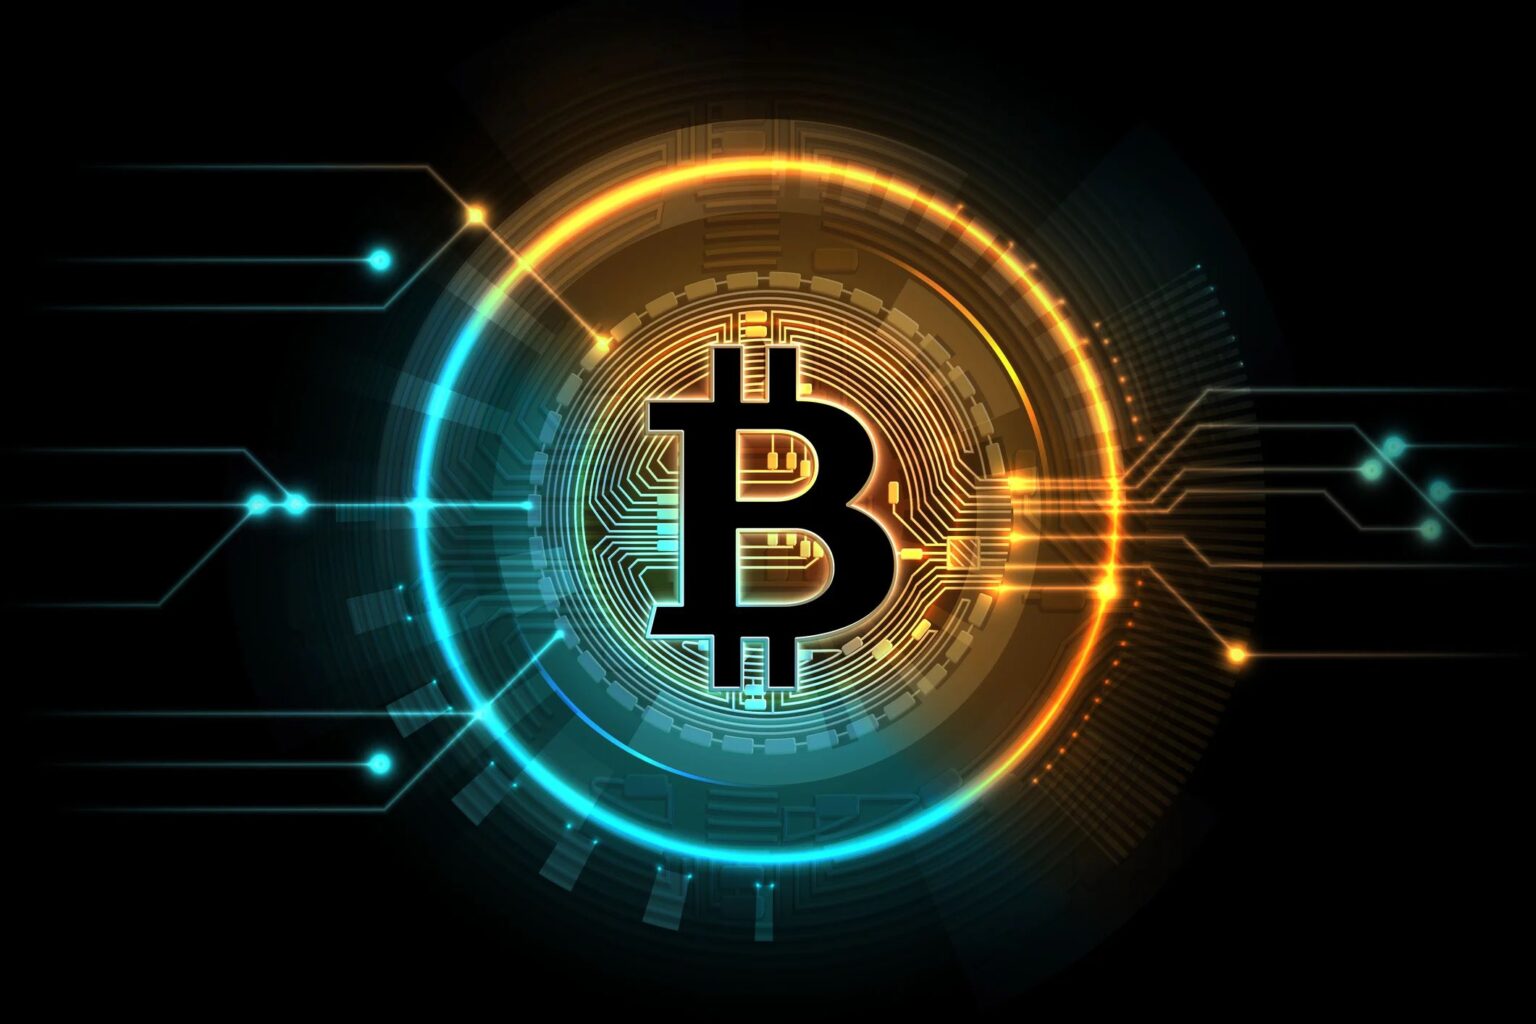 Do you need to recover lost Bitcoin after someone scammed it away from you? Get your money back today with this handy Bitcoin recovery service.